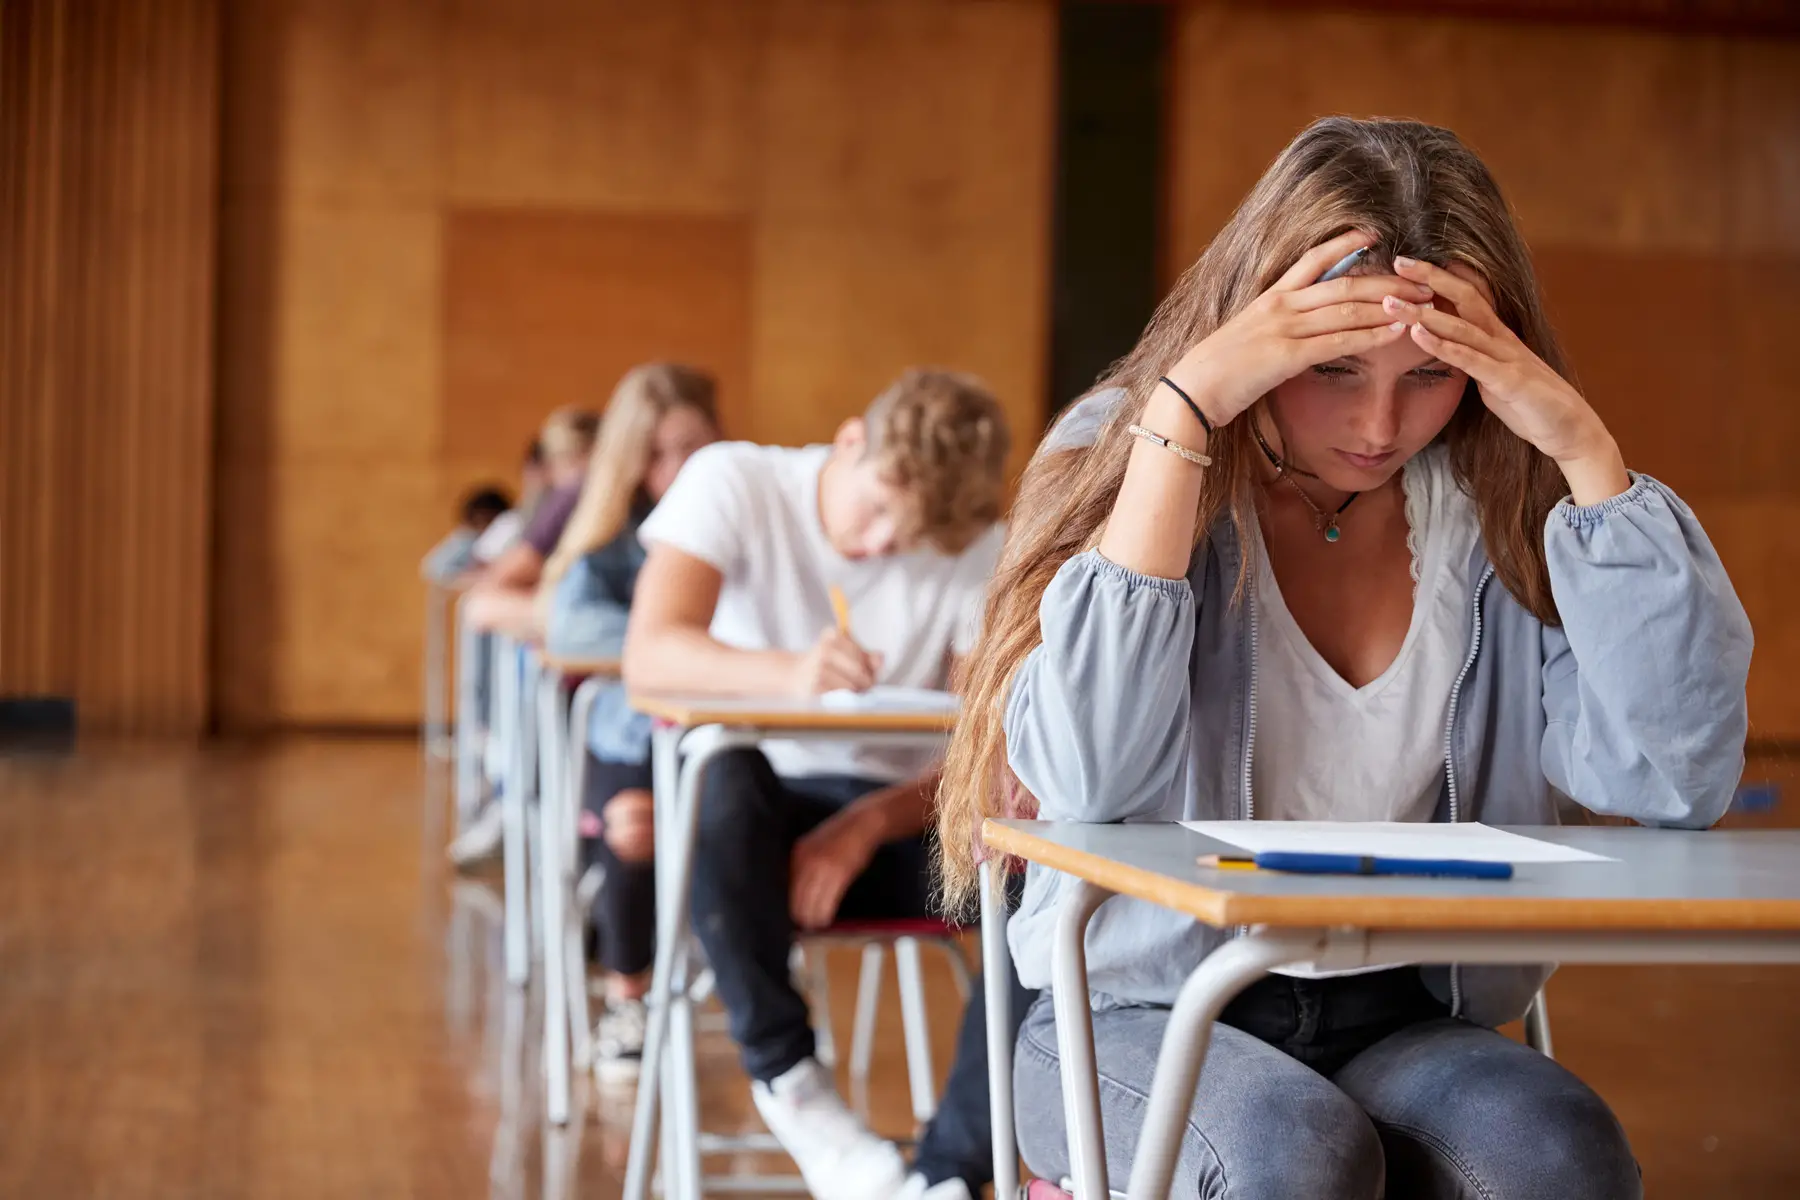 Students sitting baccalauréat exams in France